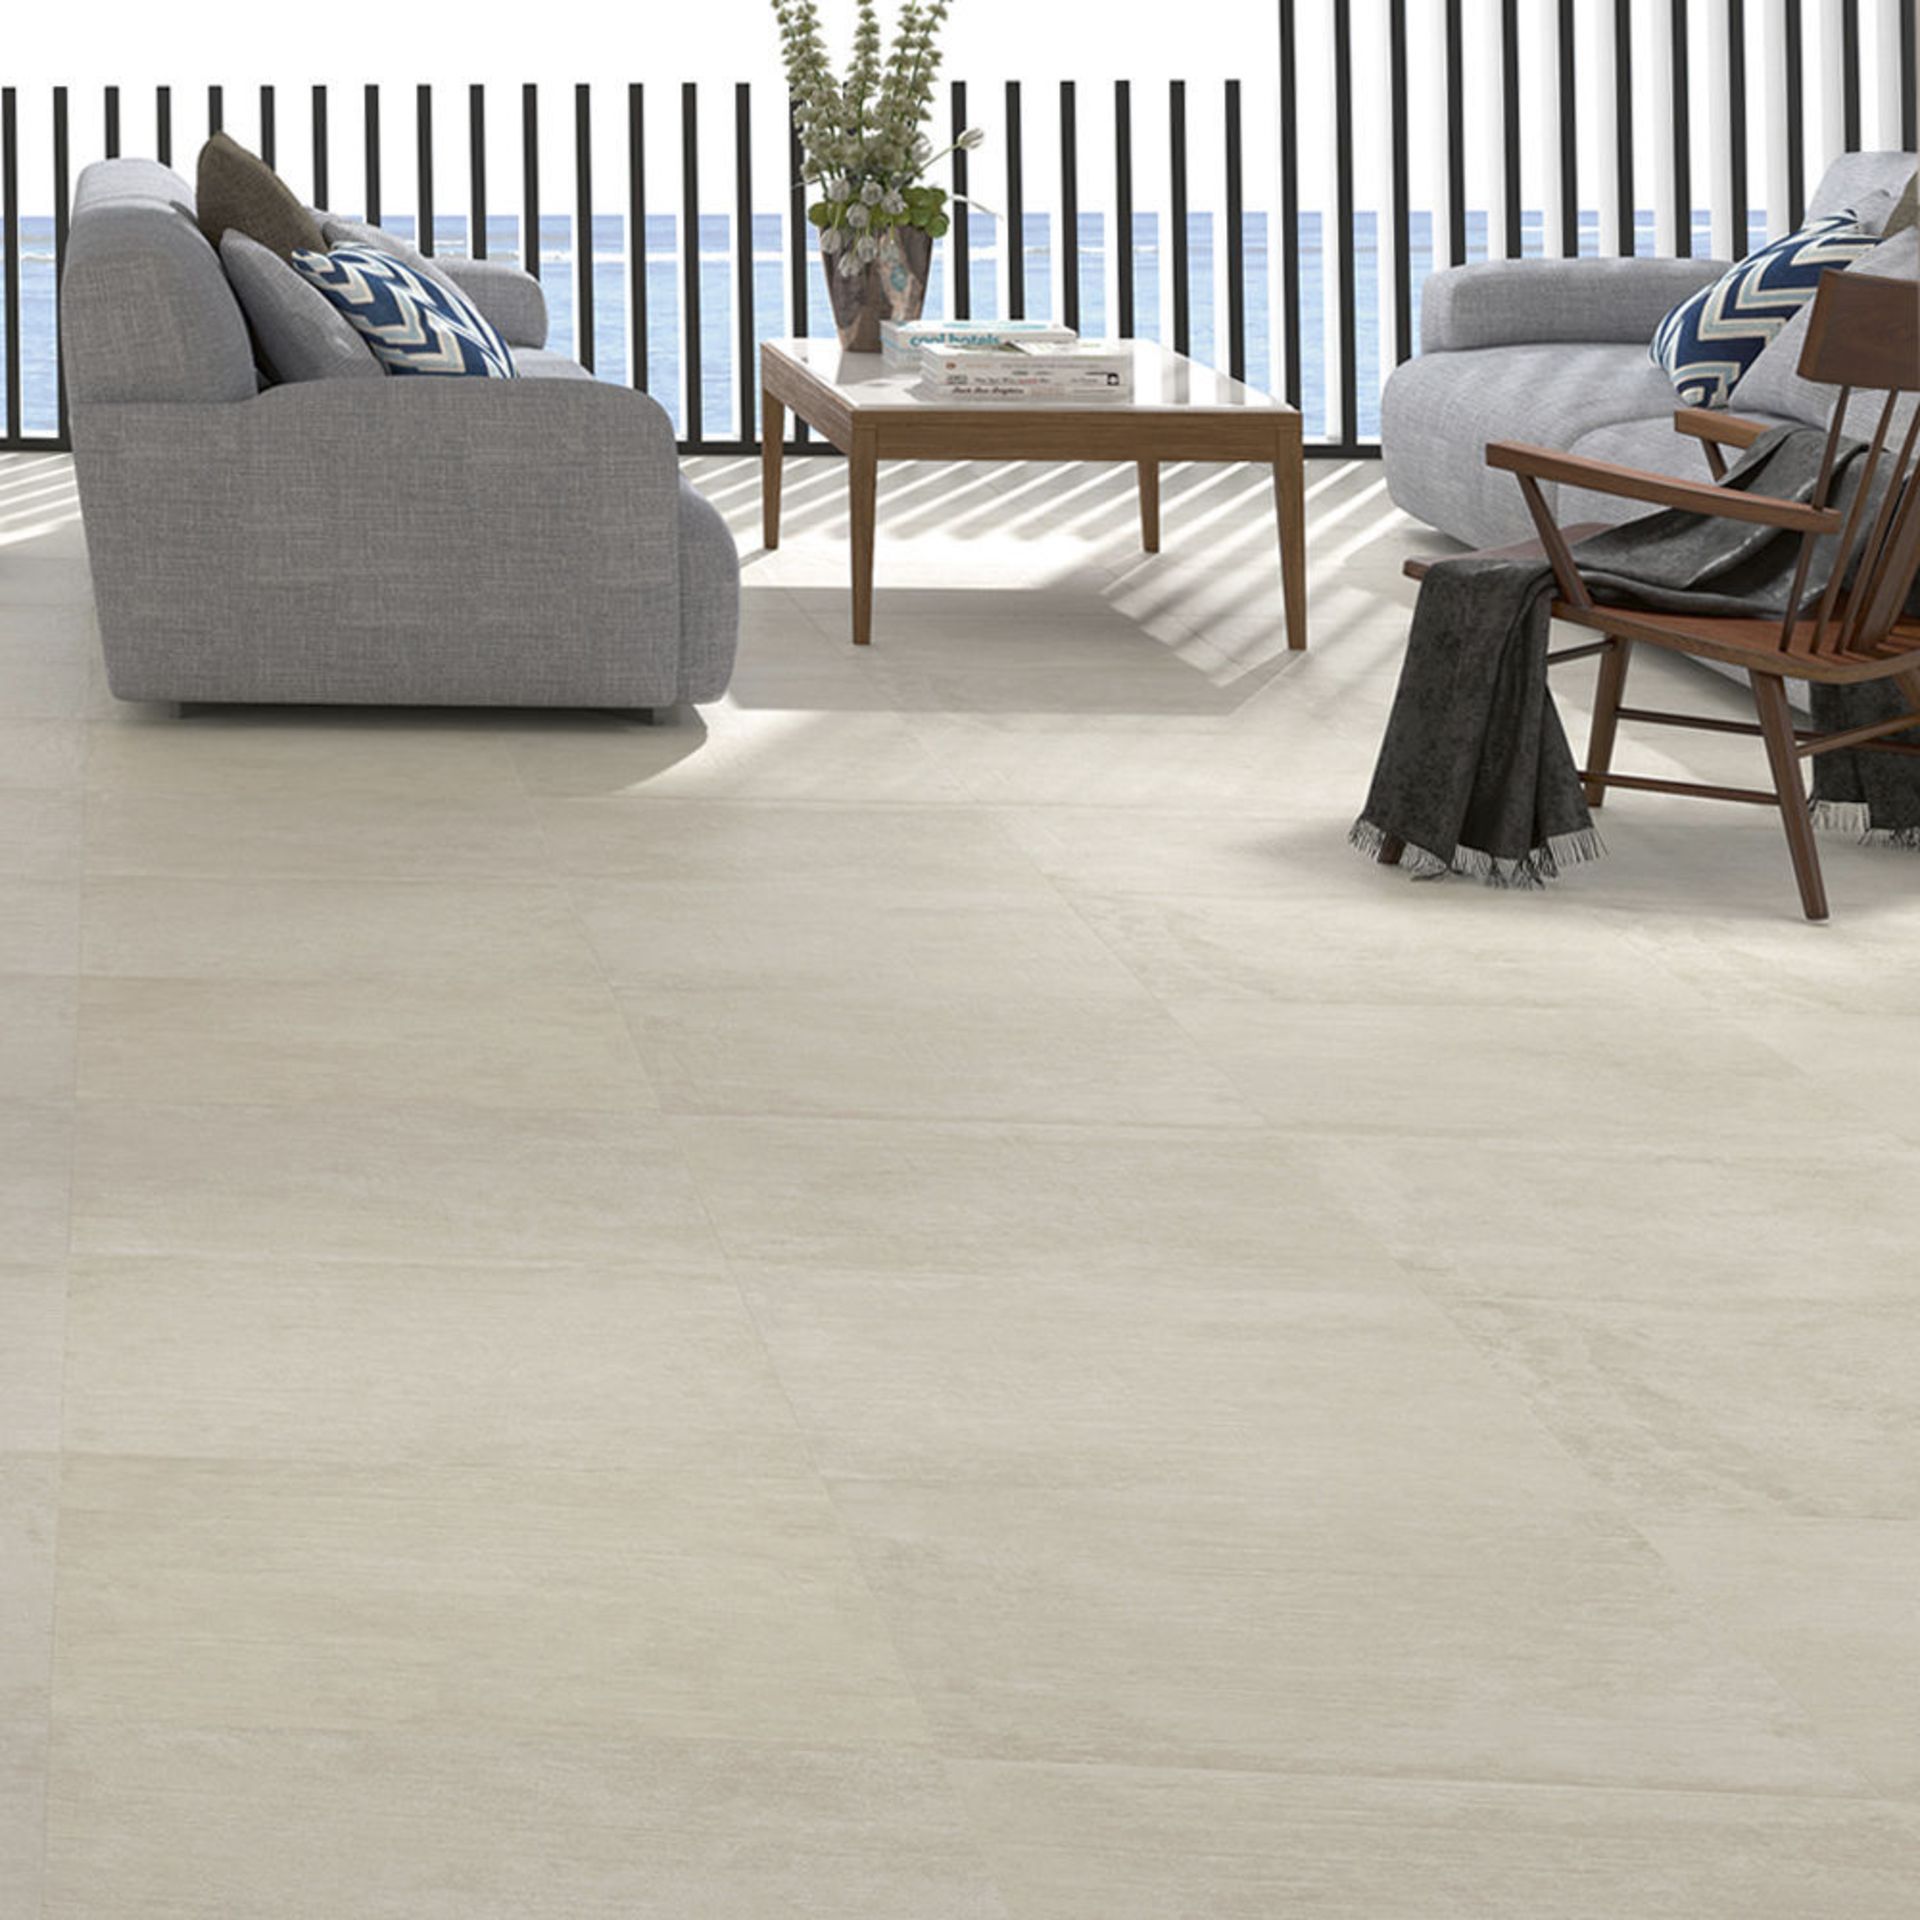 NEW 8.26M2 Square Meters of Porcelanosa Newport Beige Wall and Floor Tiles. 44.3x44.3cm per ti... - Image 4 of 4